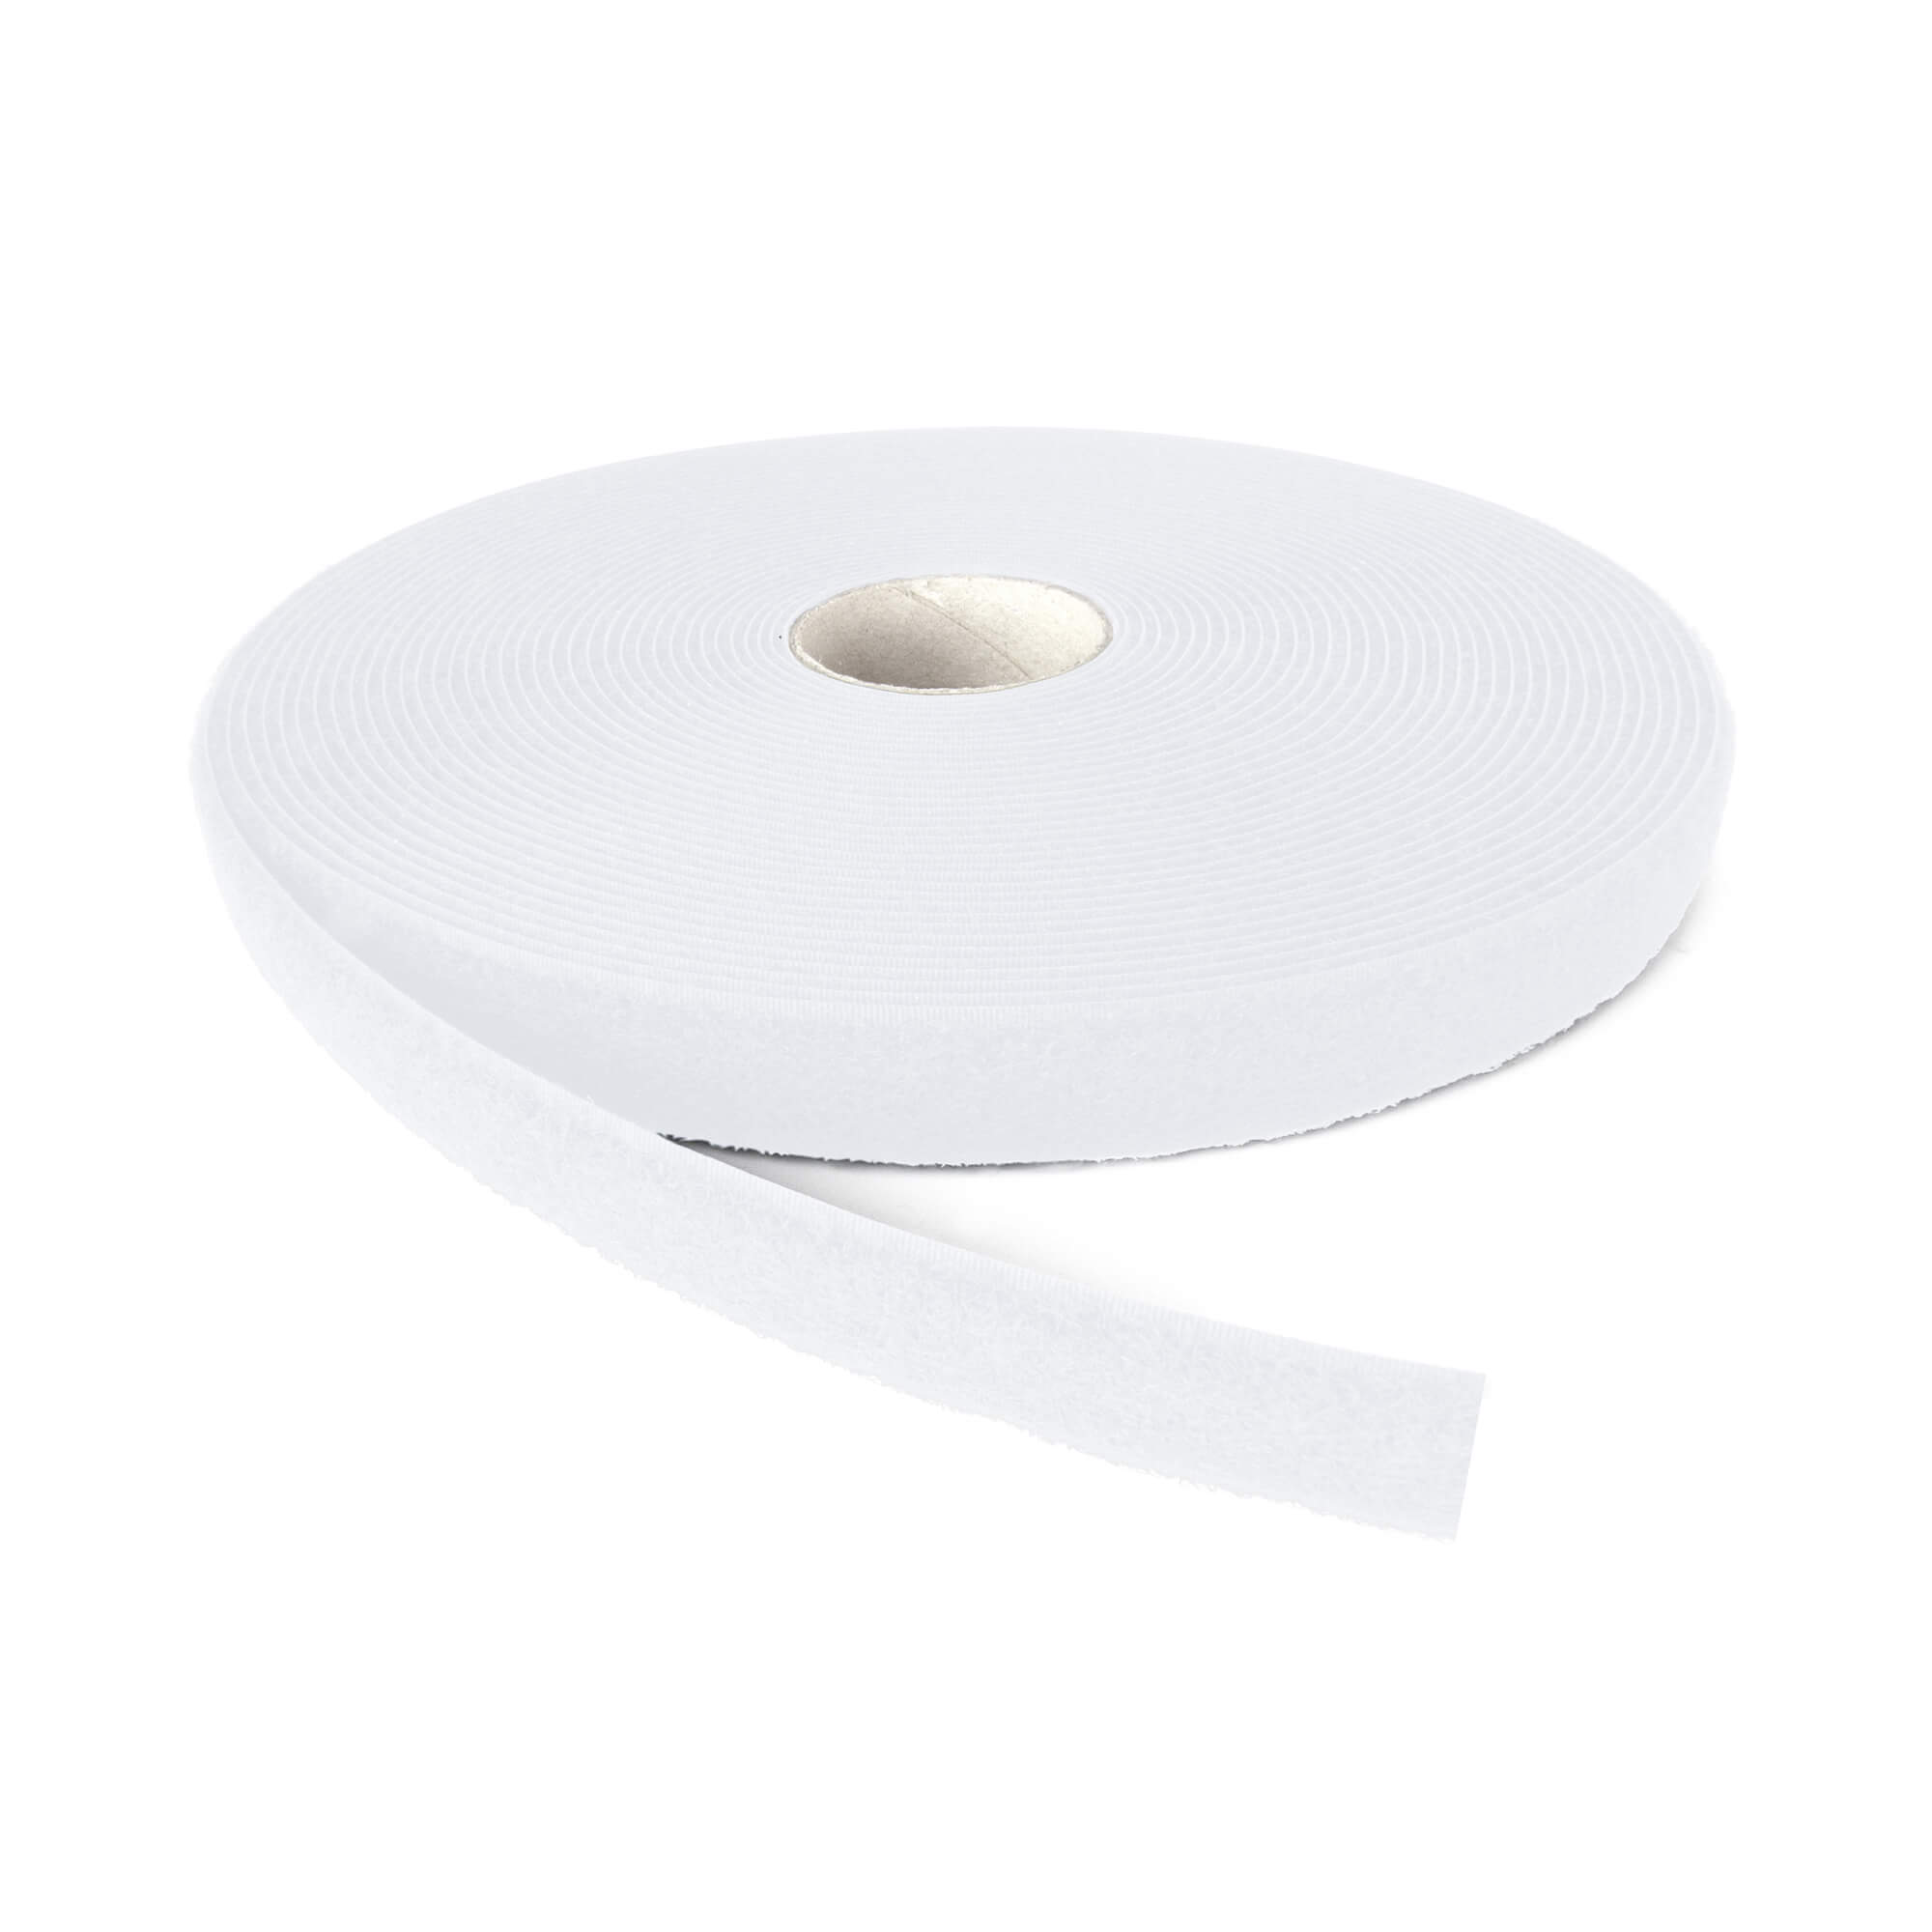 Stick & Sew White Double Sided Velcro Tape 20 mm Hook and Loop